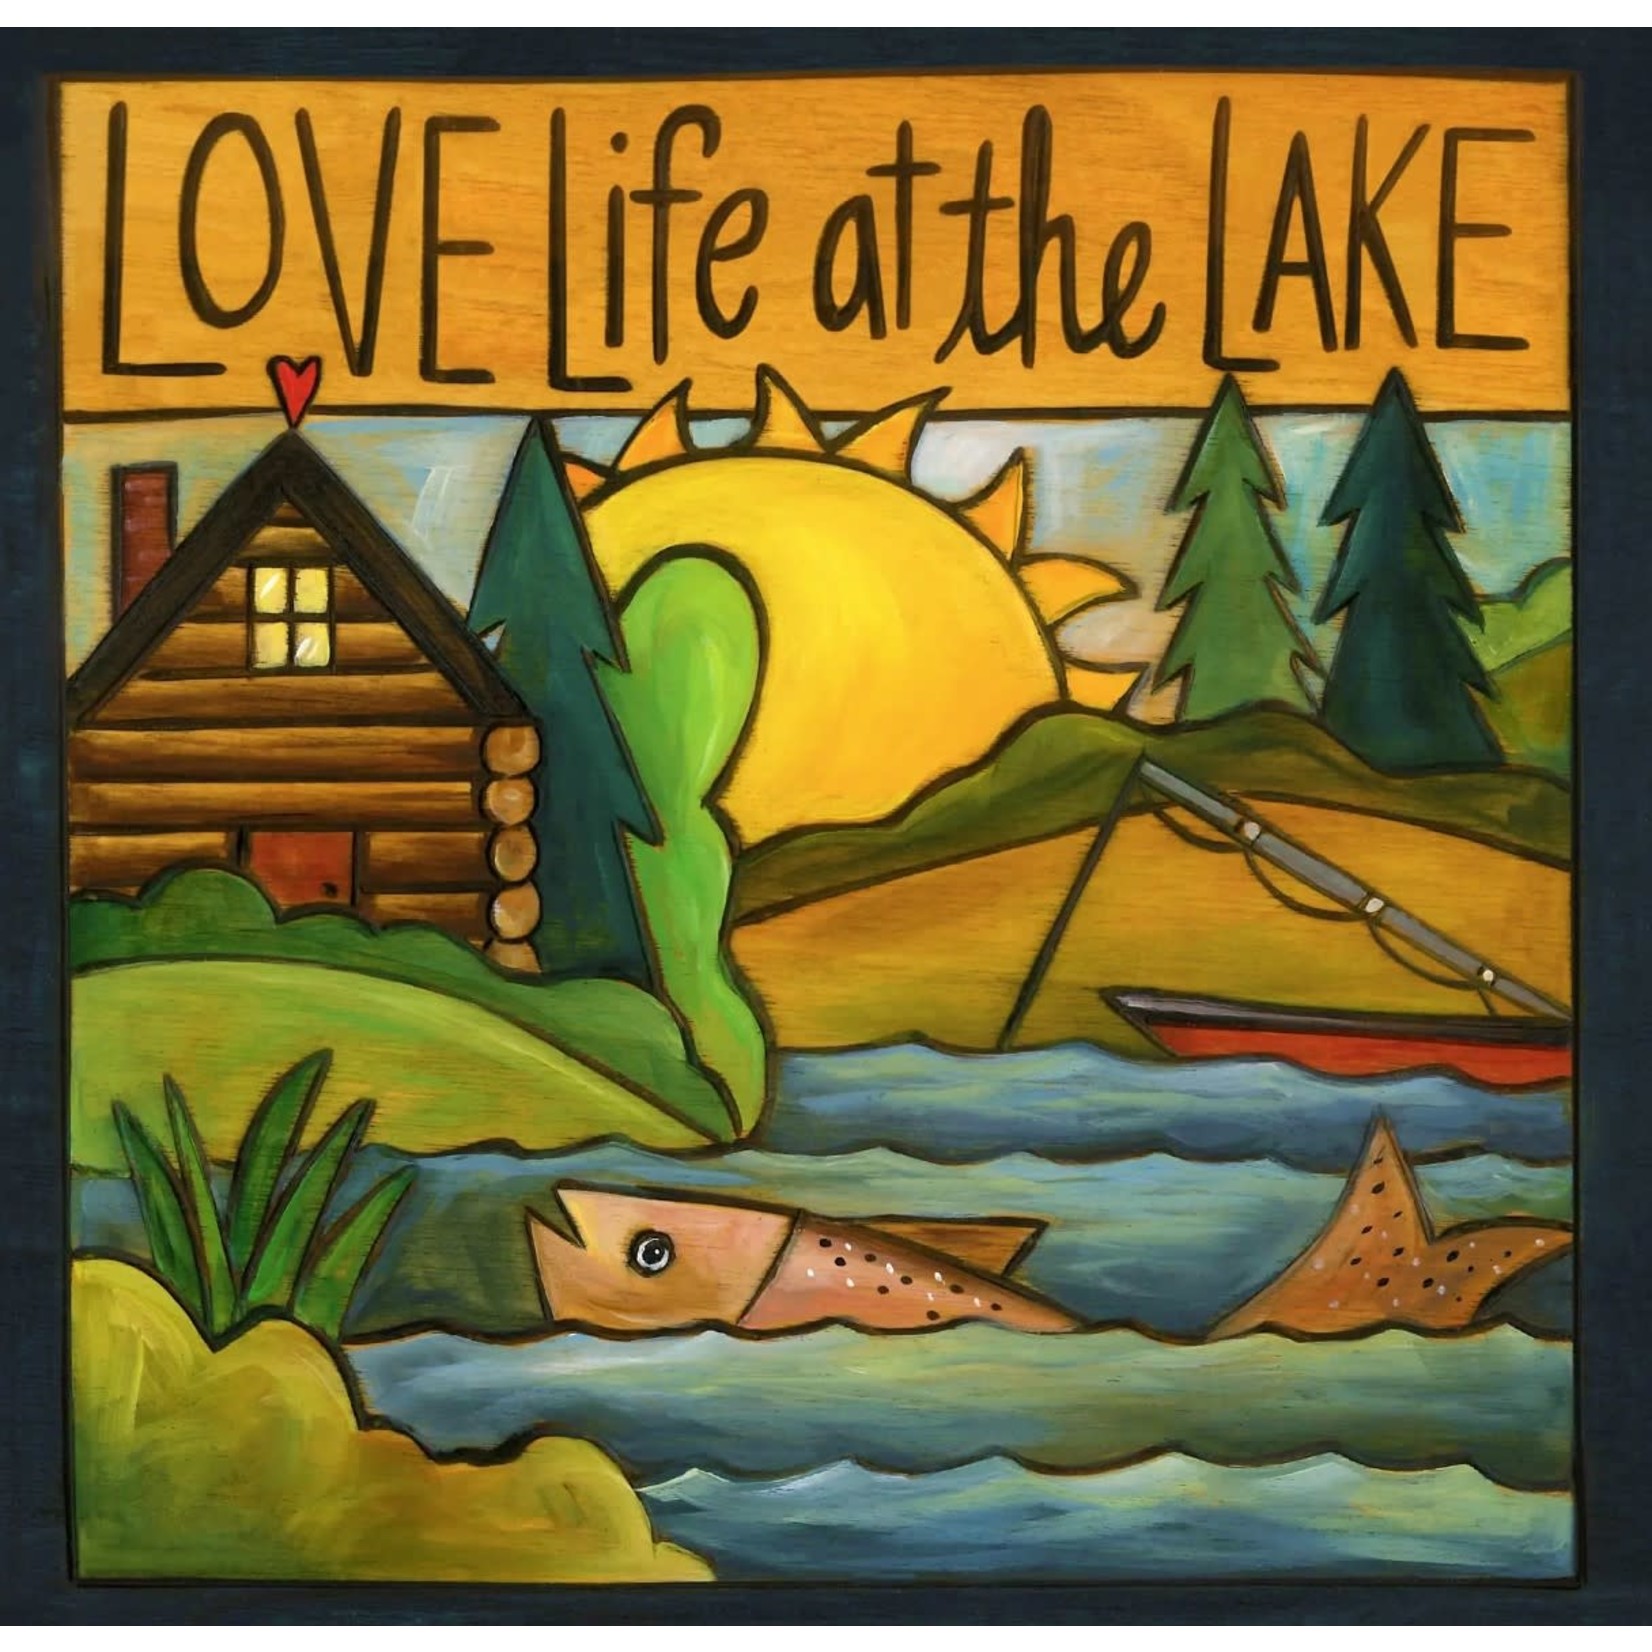 SINCERELY, STICKS GONE FISHIN - WOOD WALL ART - "LOVE LIFE AT THE LAKE"